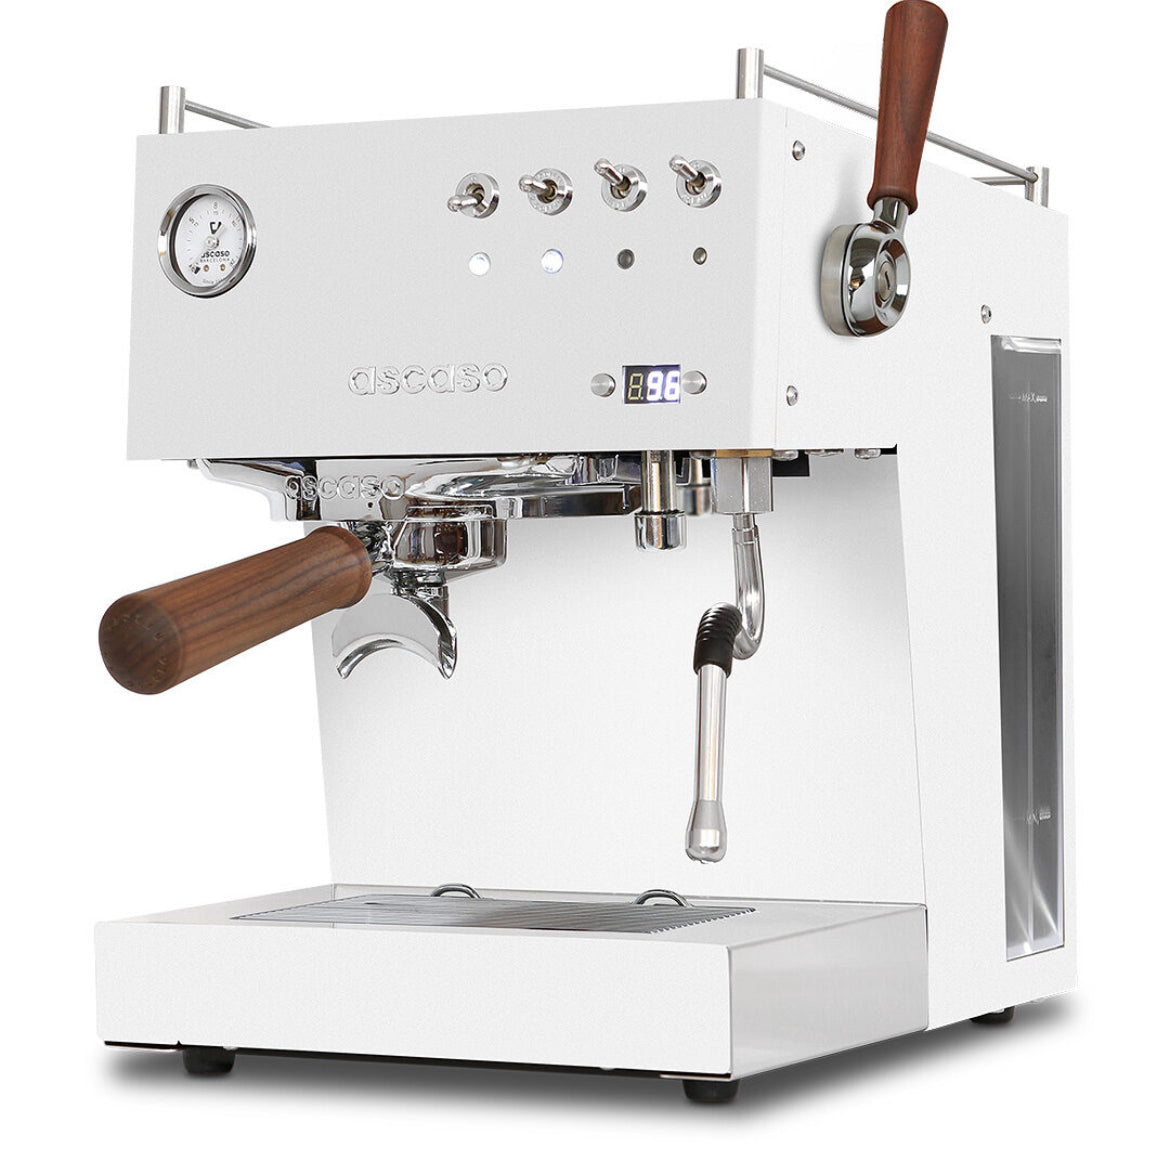 Ascaso Steel Duo PLUS incl Barista Workshop - Weiss-Holz - Coffee Coaching Club